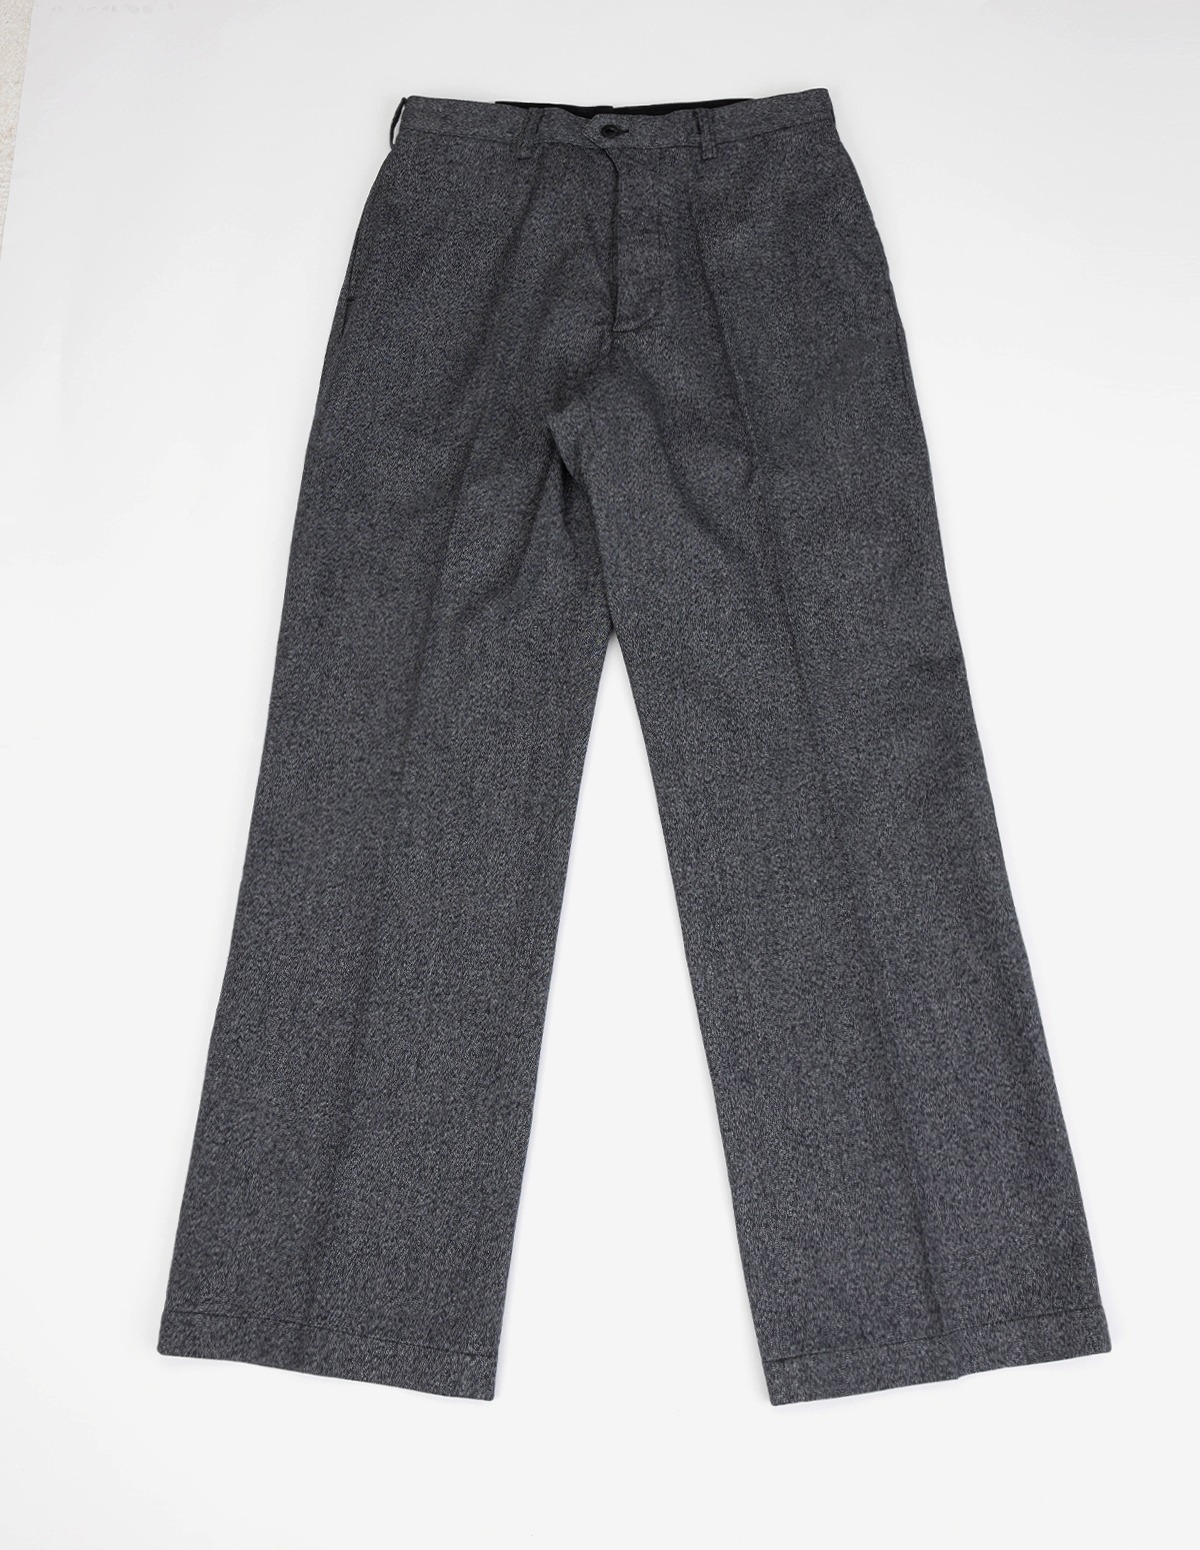 OR-1097B Work Trousers